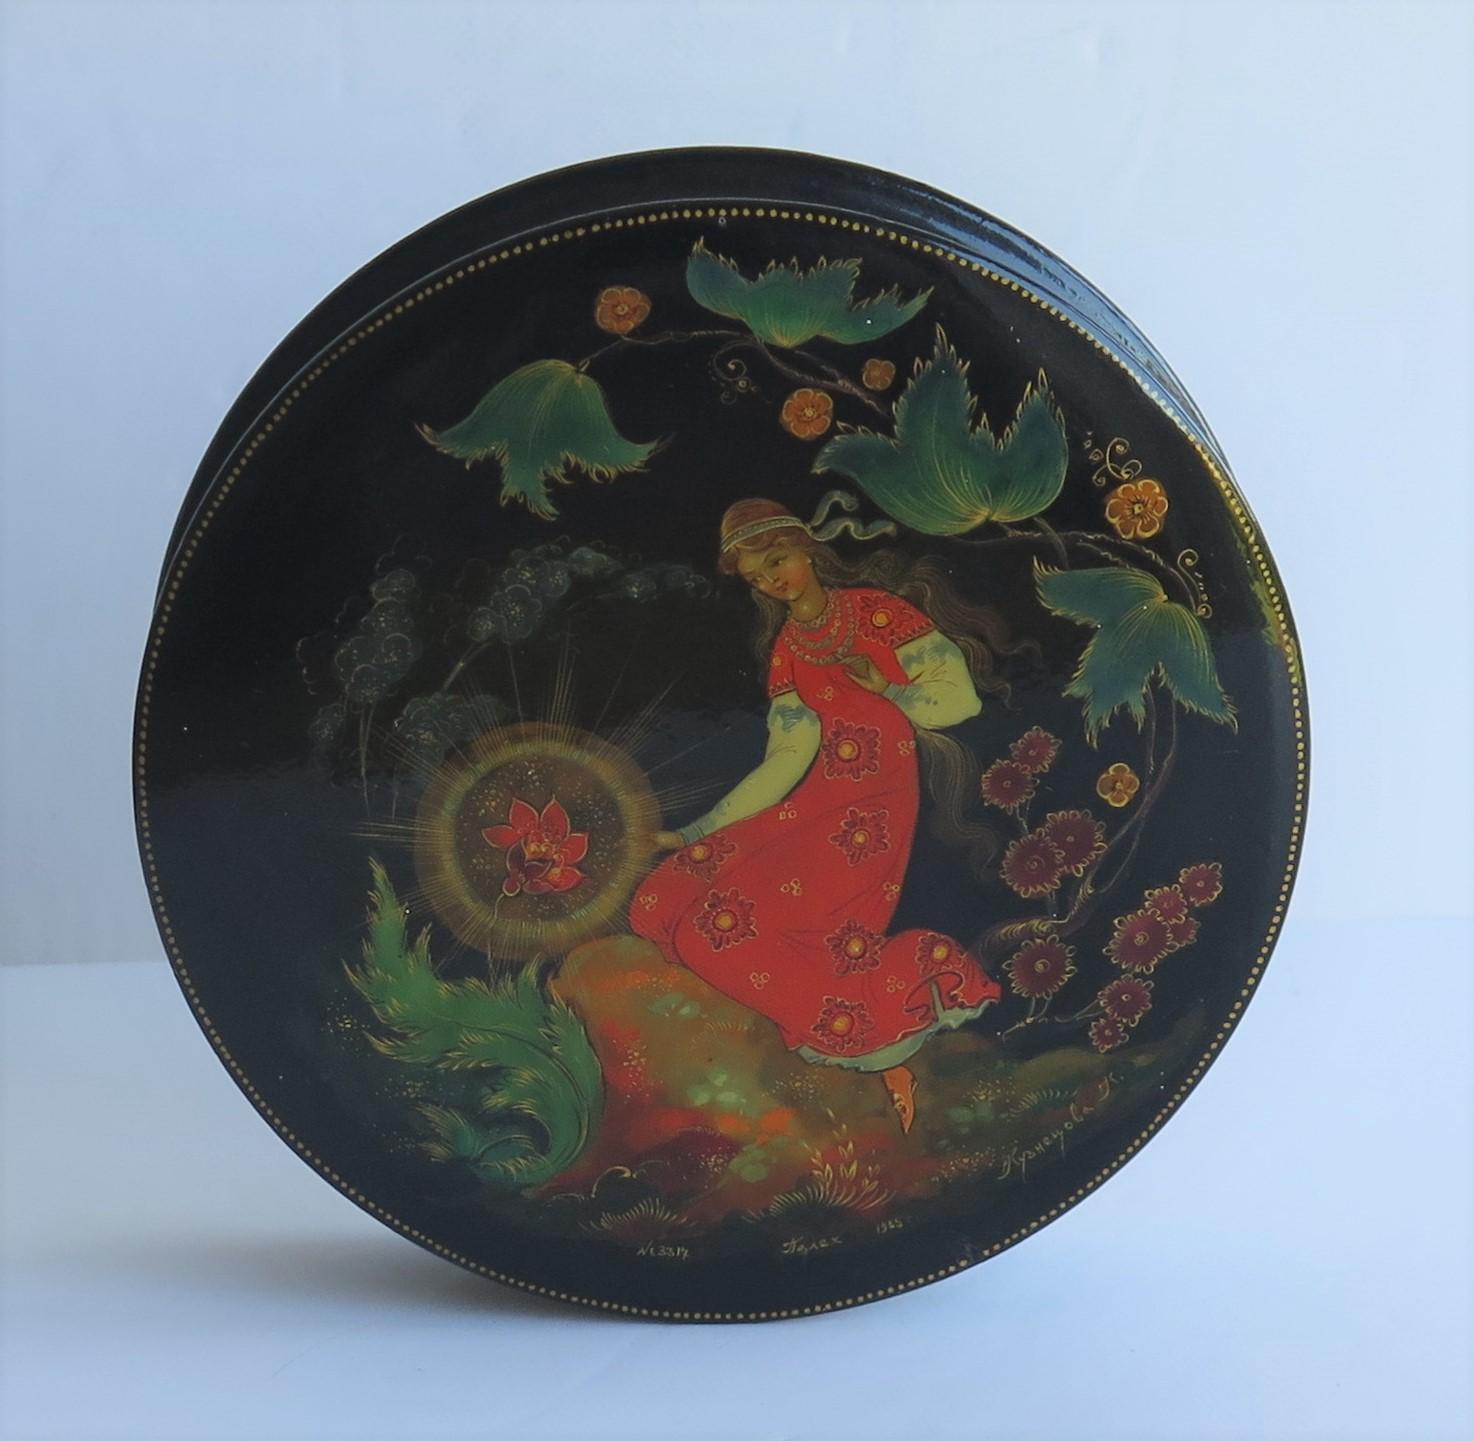 Paper Fine Russian Palekh Lacquered Lidded Box Hand Painted Signed and Dated 1965